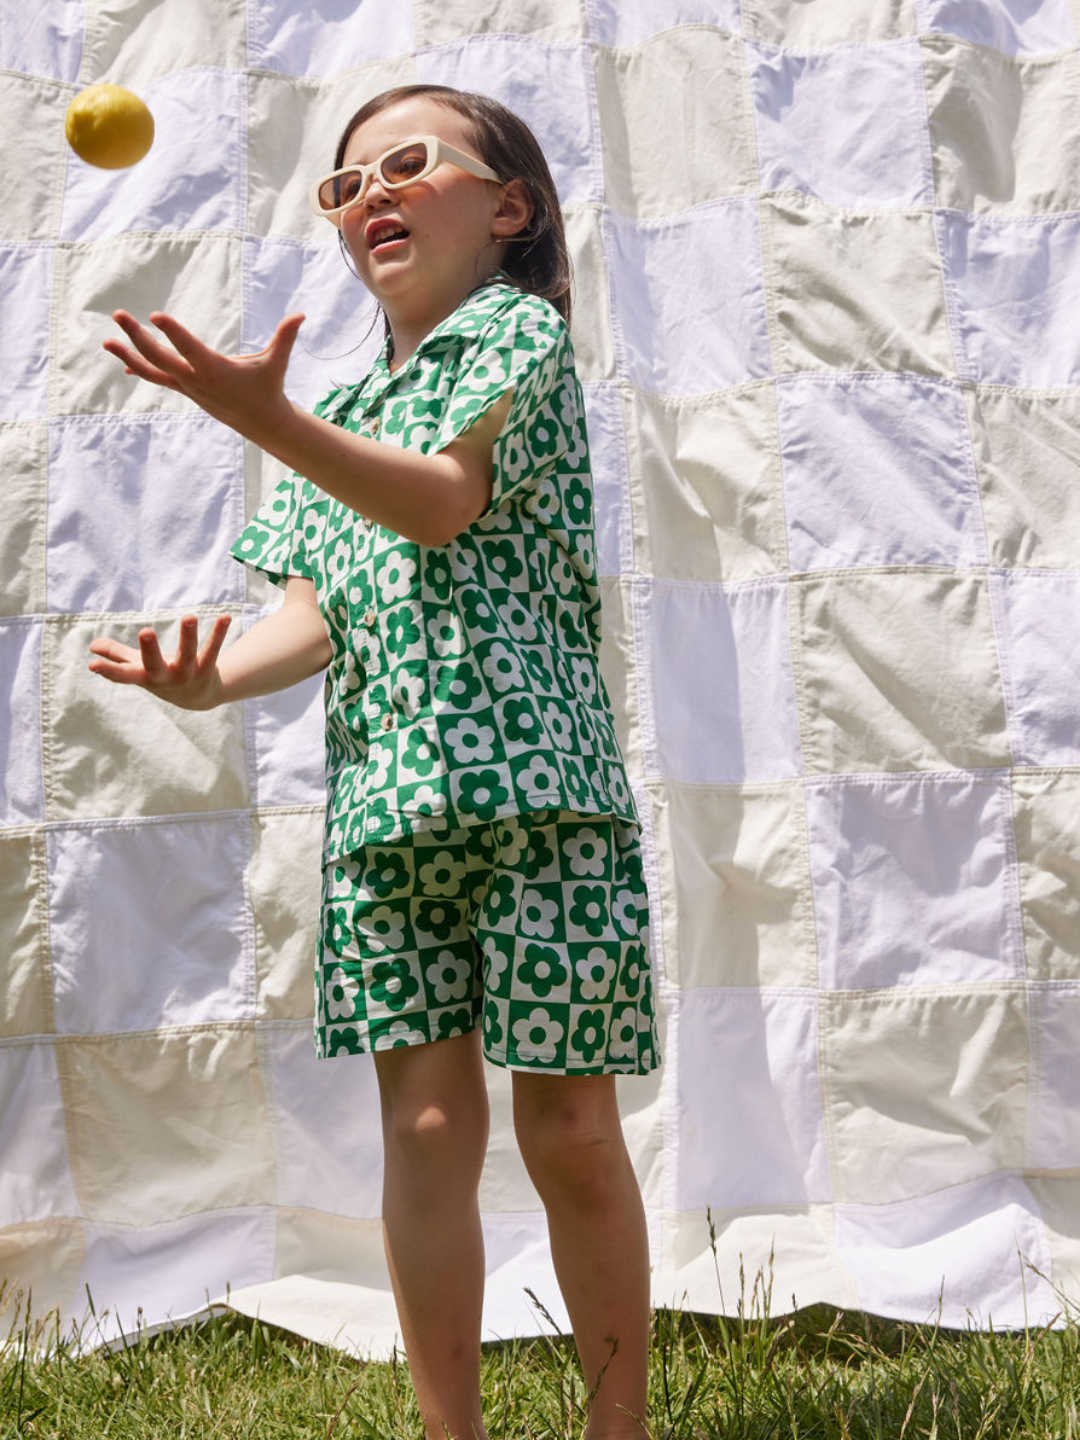 Pine | Child wearing a kids' short set in a checkerboard pattern of green and white flowers